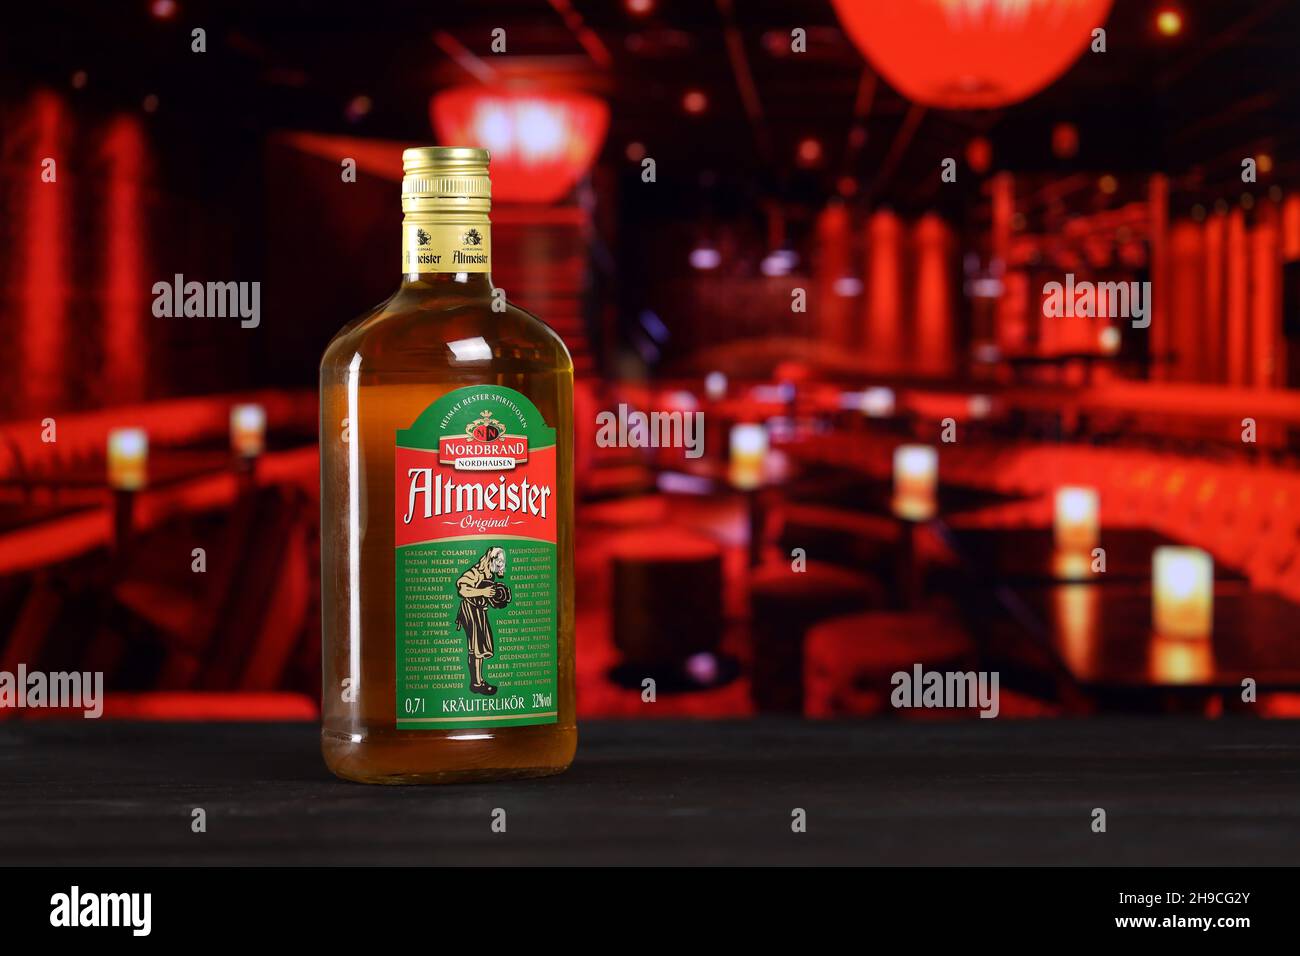 KHARKOV, UKRAINE - FEBRUARY 14, 2021: Altmeister original liqueur bottle on wooden table with red bar interior on background. Elite alcohol production Stock Photo